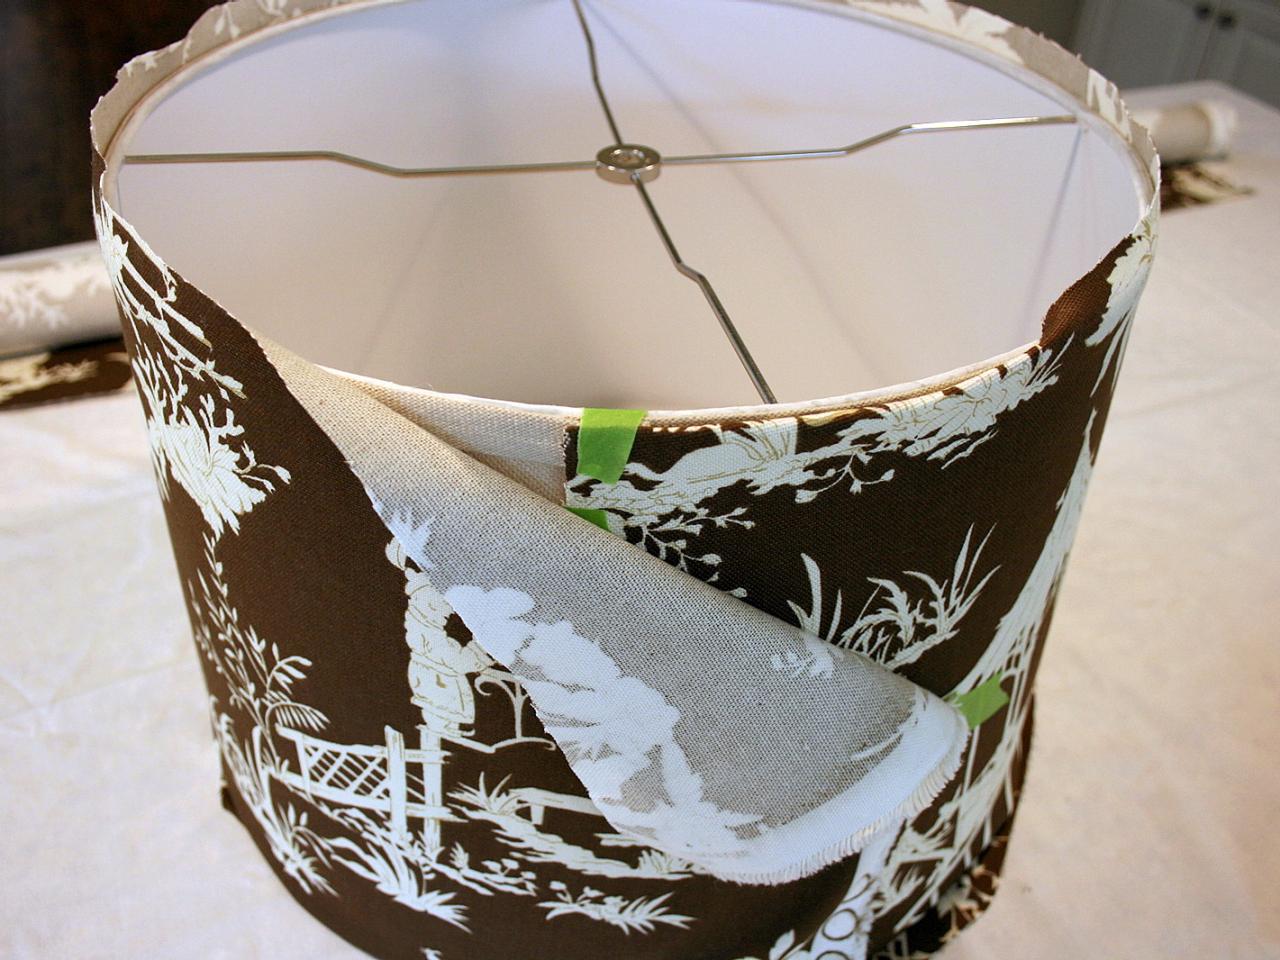 Custom Fabric Covered Lampshade, How To Make A Fabric Covered Lampshade